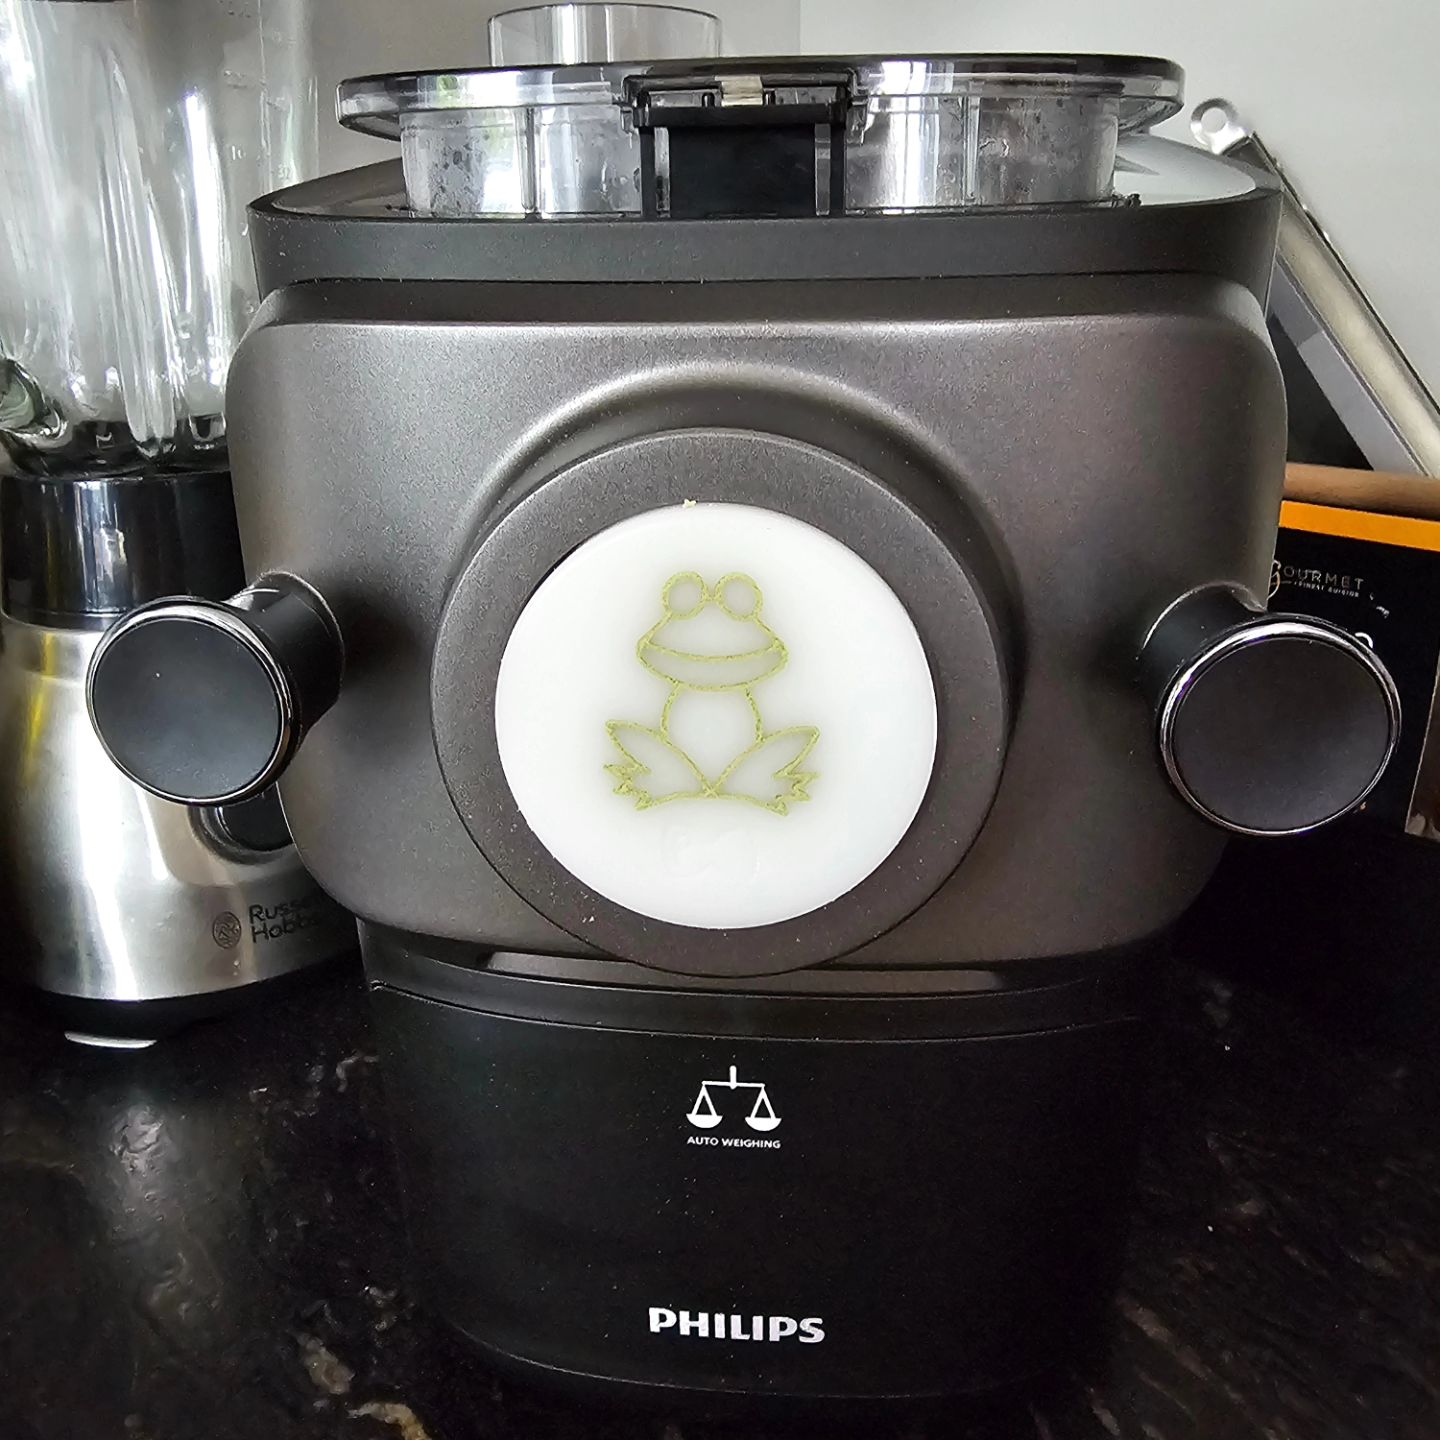 die made of pom frog / frog for philips avance / 7000 series